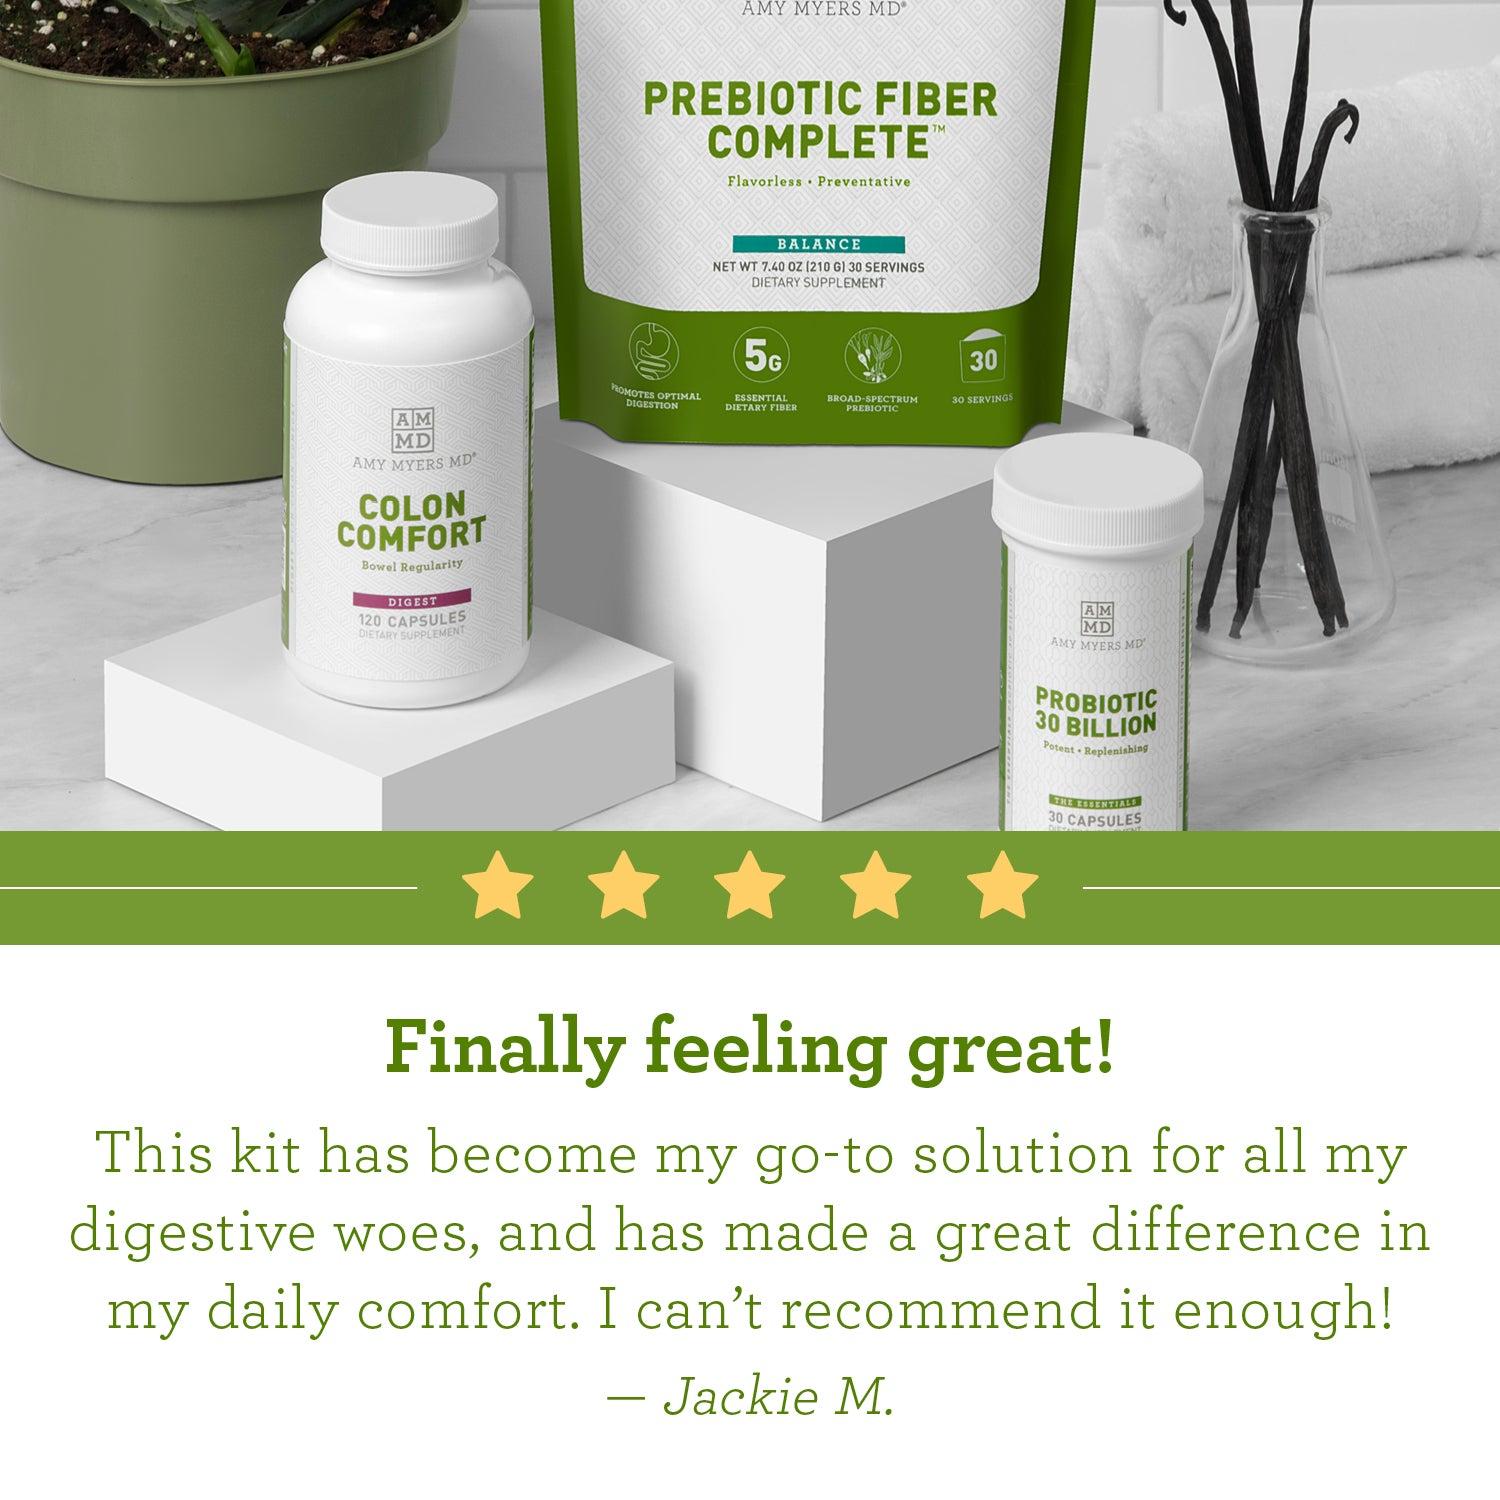 Colon Comfort Review - "Finally feeling great! This kit has become my go-to solution for all my digestive woes, and has made a great difference in my daily comfort. I can't recommend it enough!" -Jackie M. 